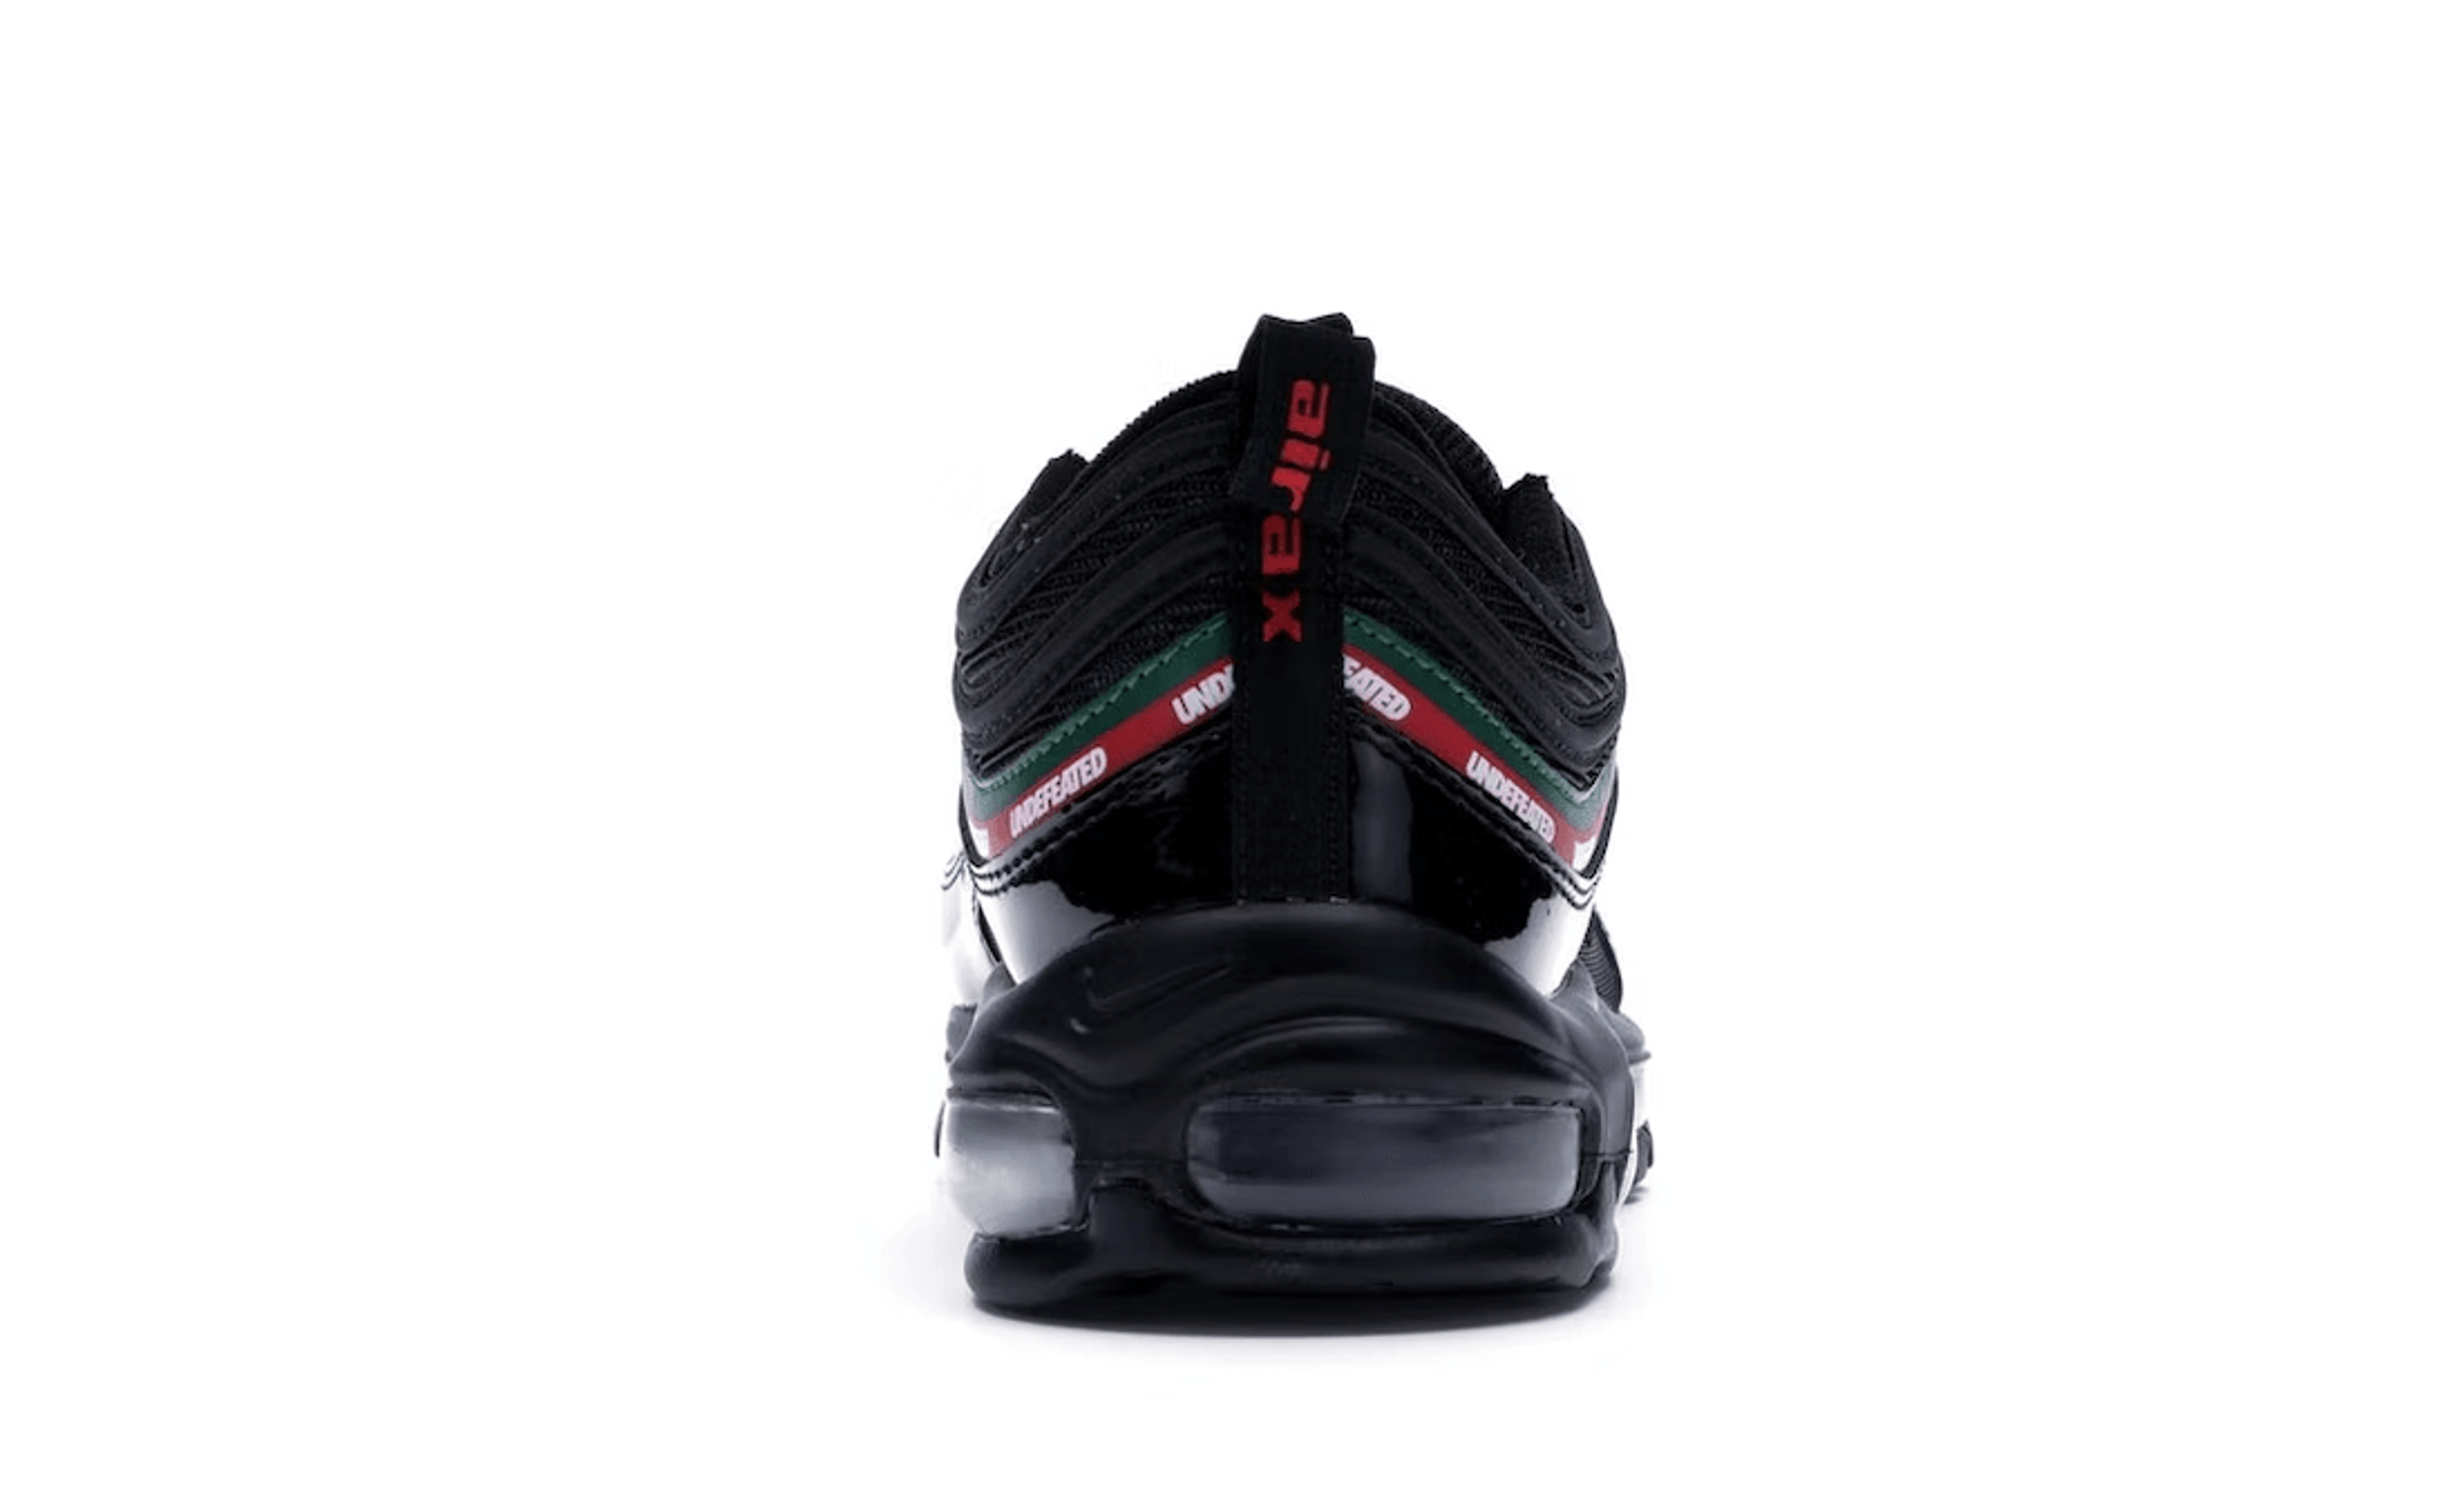 Alternate View 3 of Nike Air Max 97 Undefeated Black